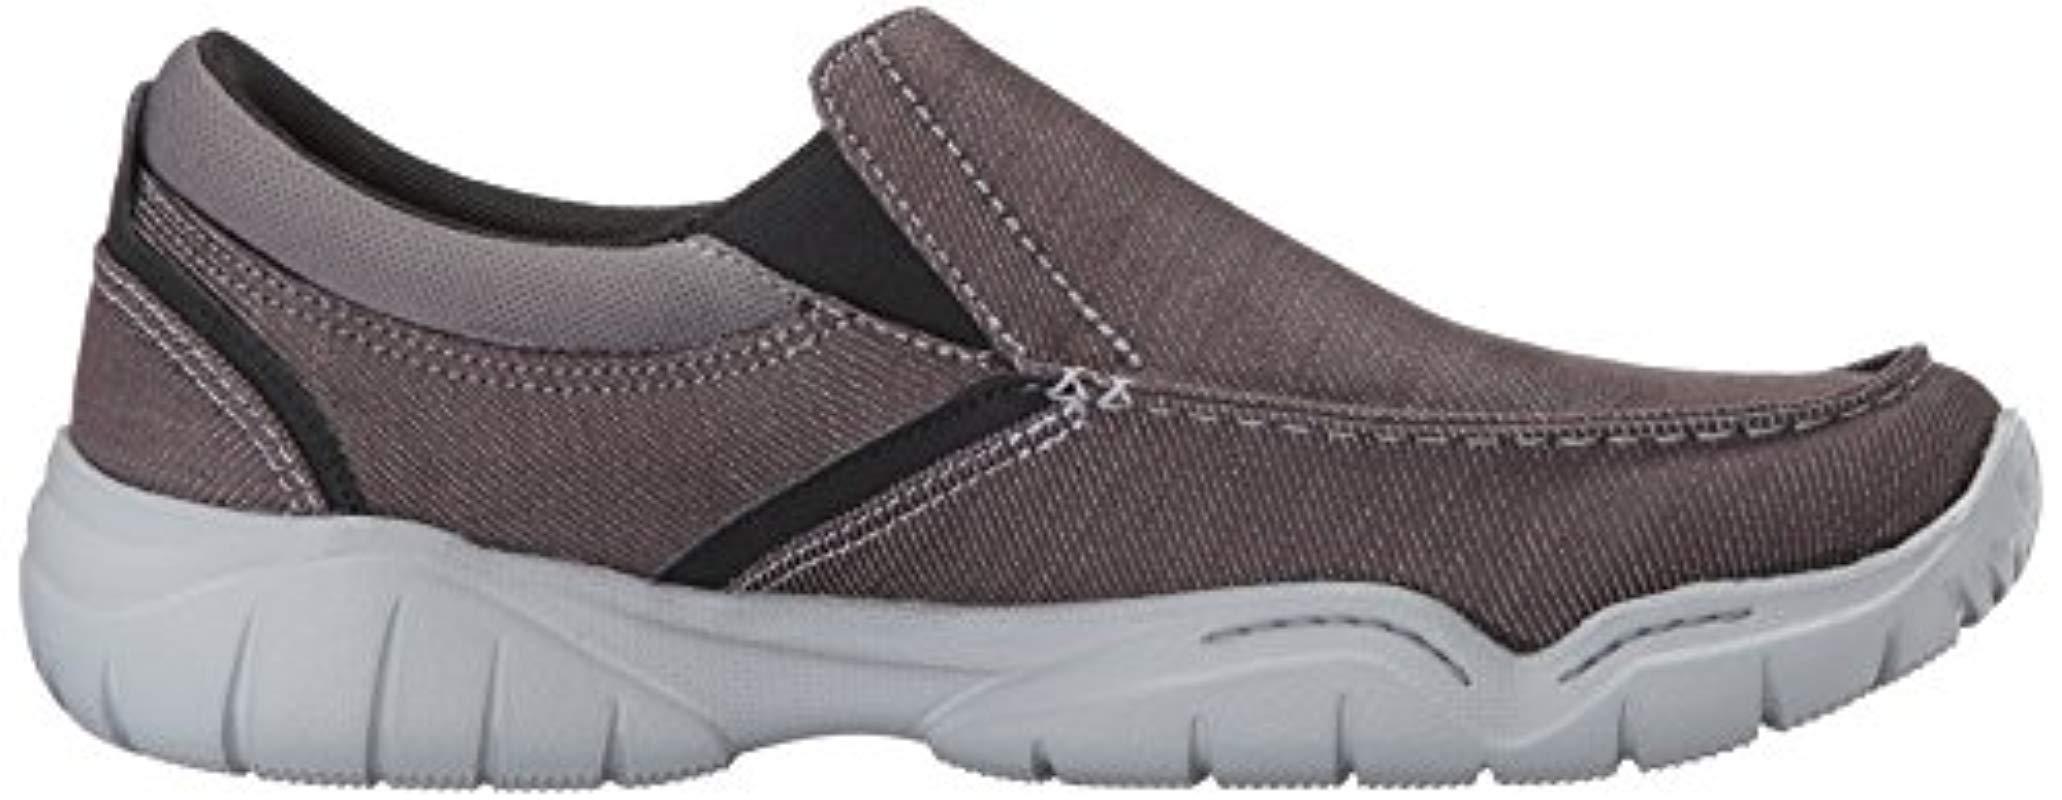 Crocs™ Swiftwater Casual Slip-on 